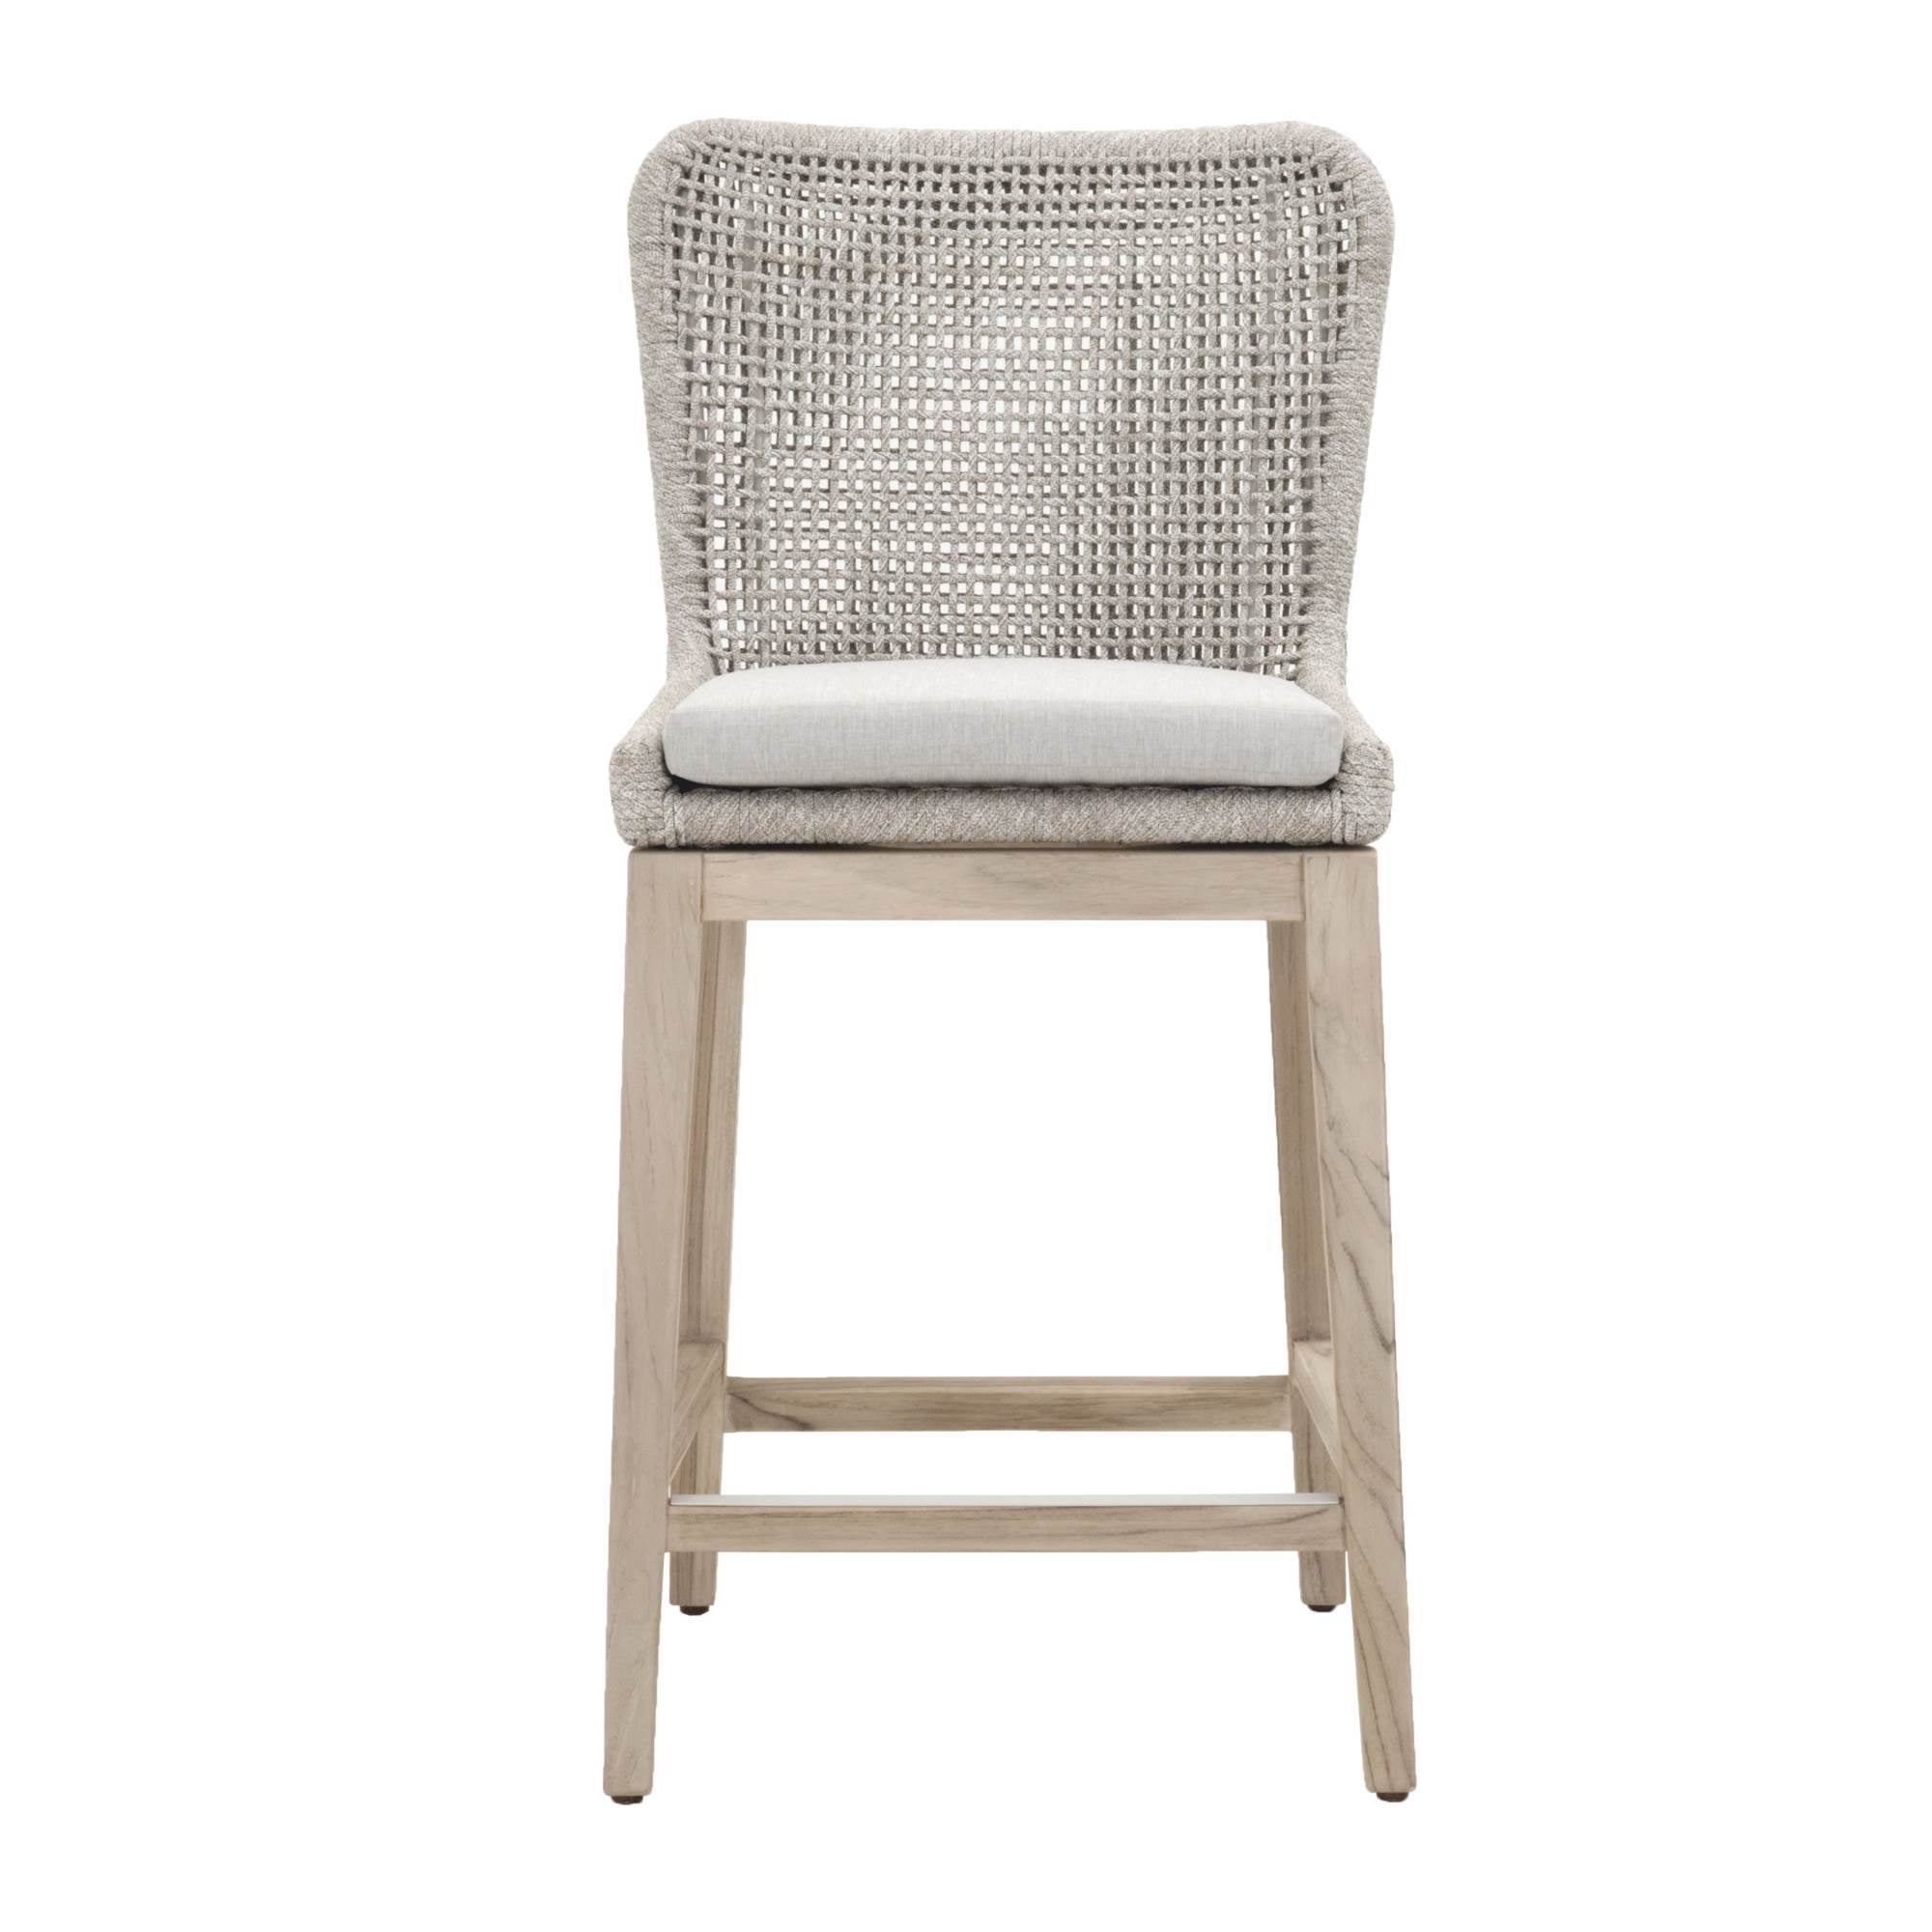 Mesh Outdoor Counter Stool in Taupe & White Flat Rope